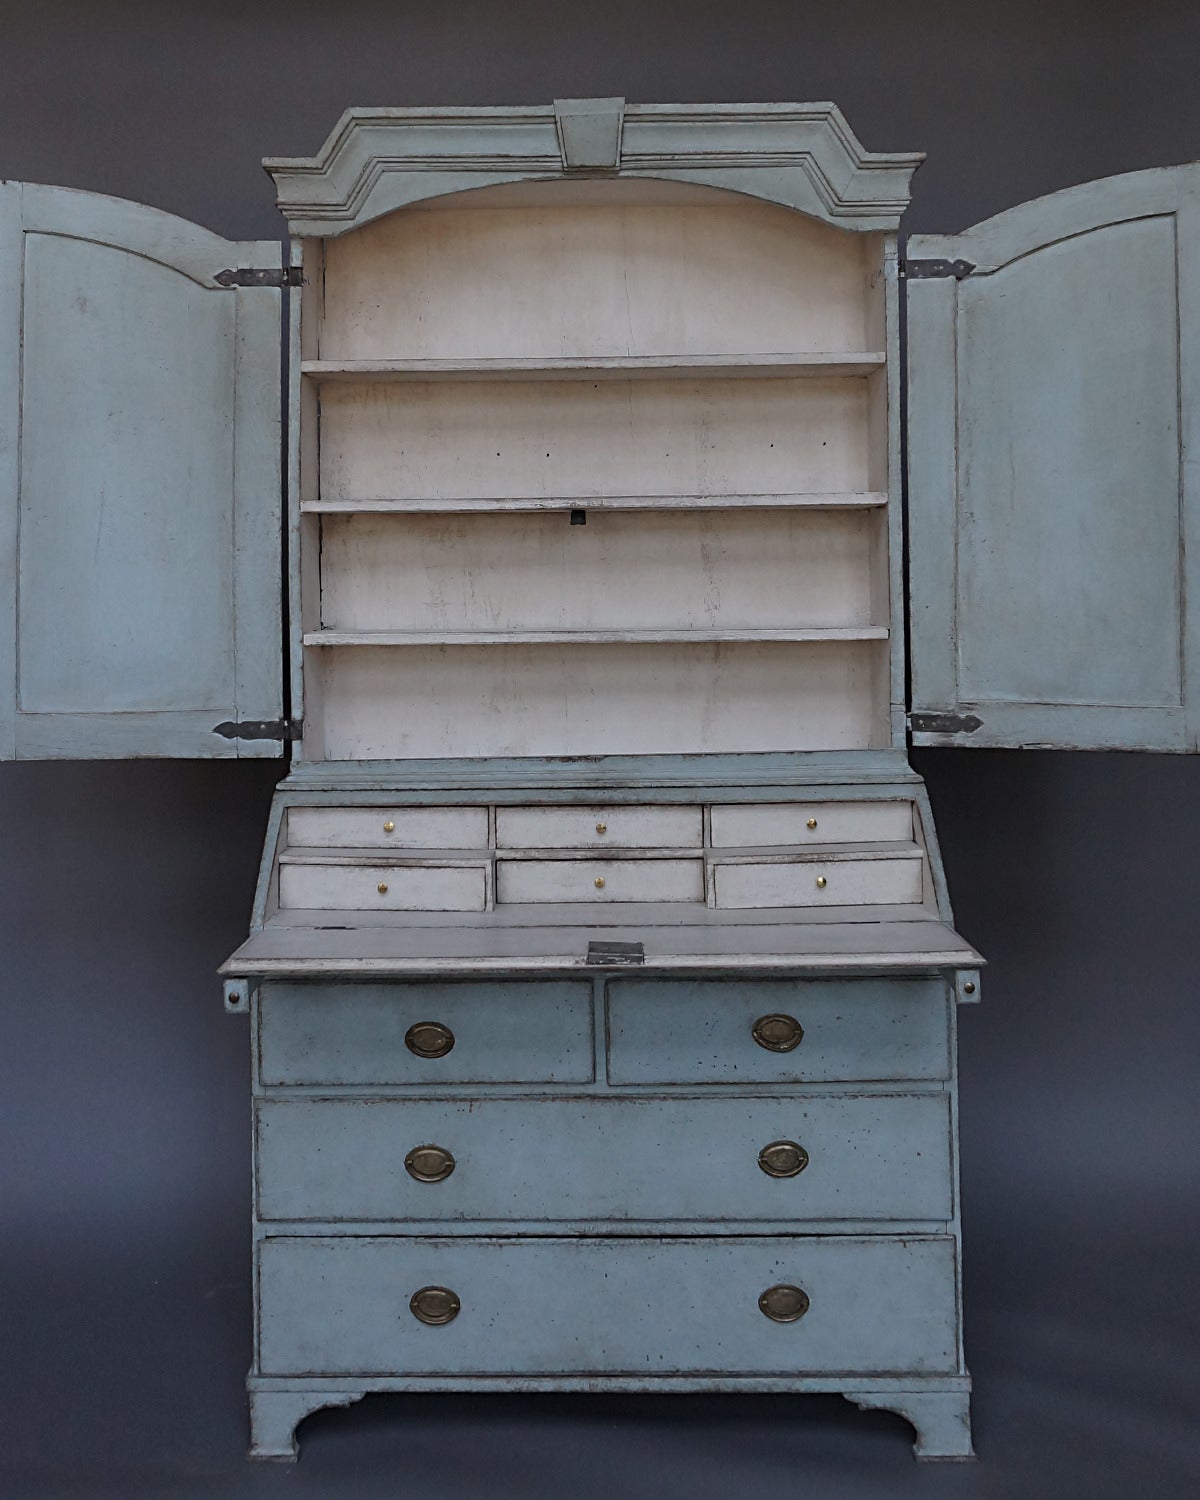 Early Swedish two-part secretary, circa 1820, with a squared cornice with keystone detail over a pair of arched doors with raised and reeded panels. The lower section has a fitted interior behind the slant front and two over two drawers below.